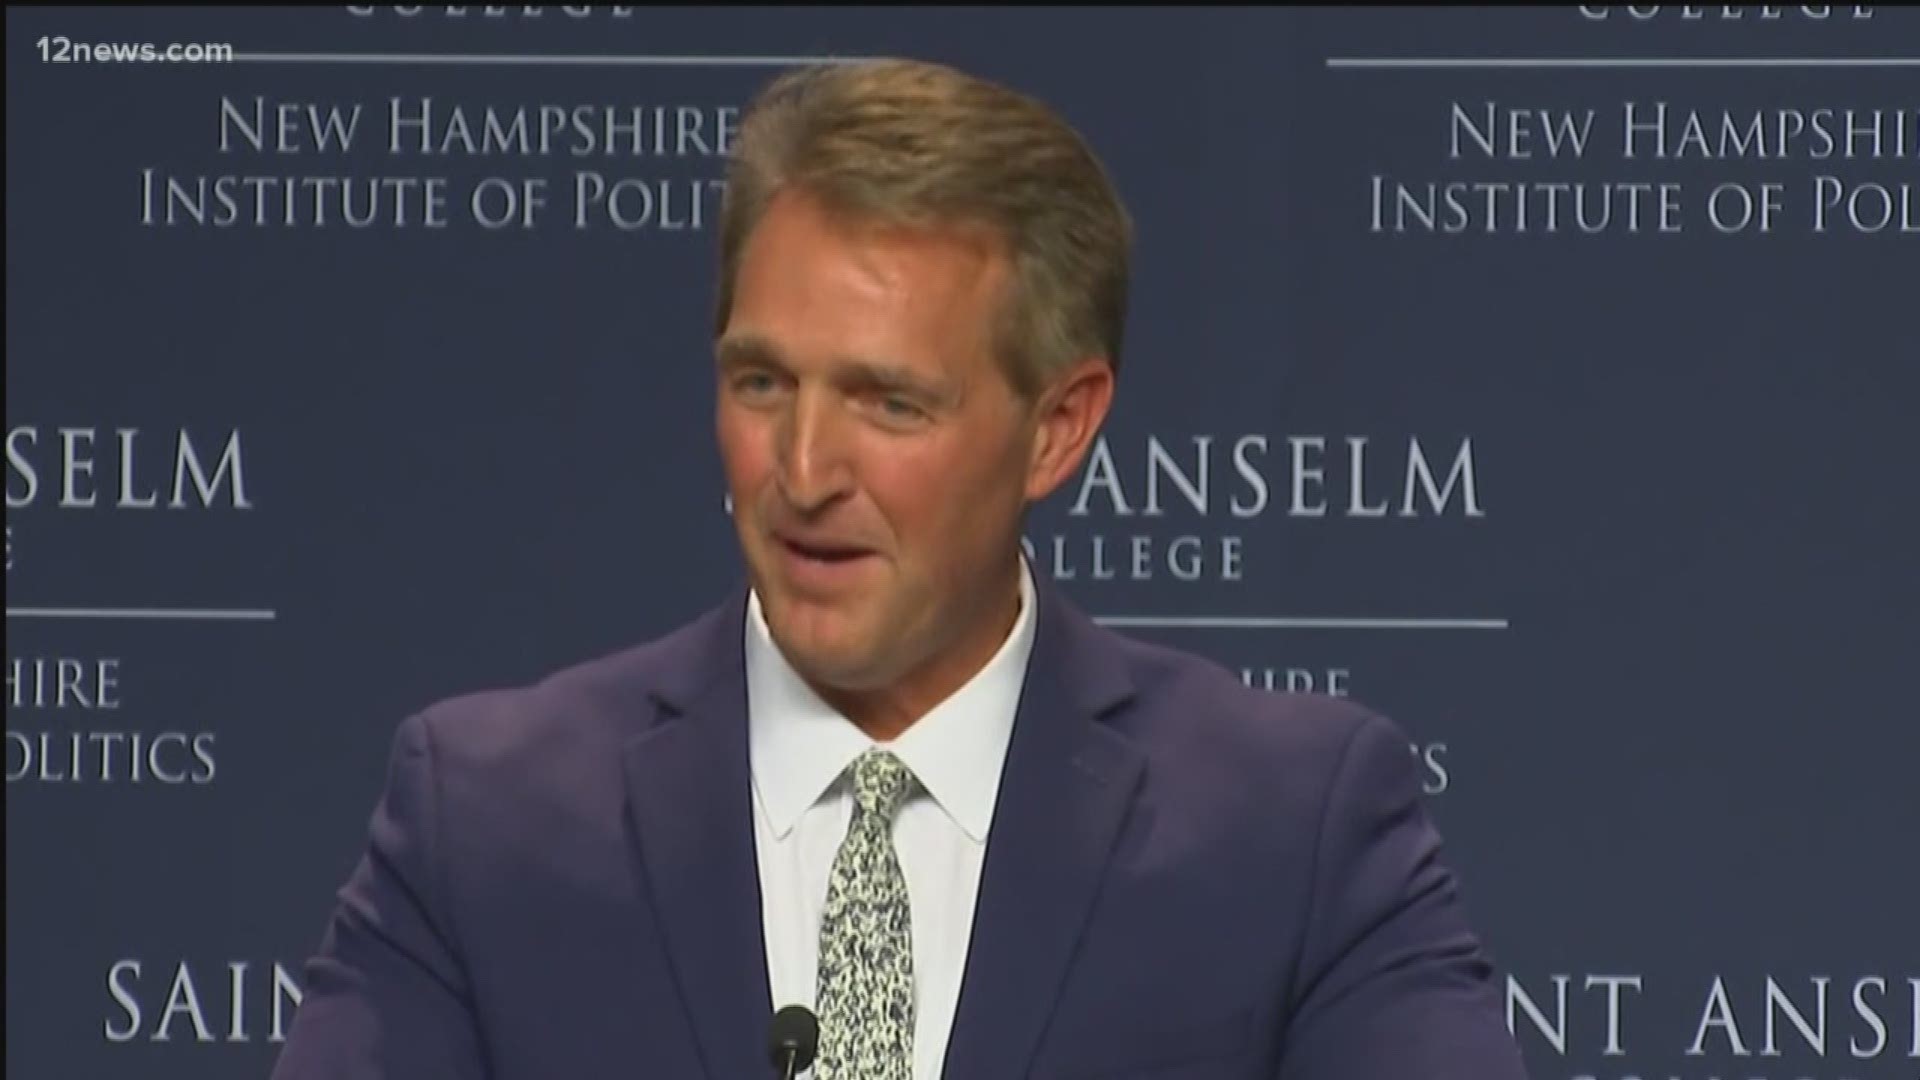 Arizona's Jeff Flake is traveling the East coast after demanding an FBI investigation into the accusations against Brett Kavanaugh. Flake says he wants someone to challenge Trump in 2020, but won't say if it will be him.